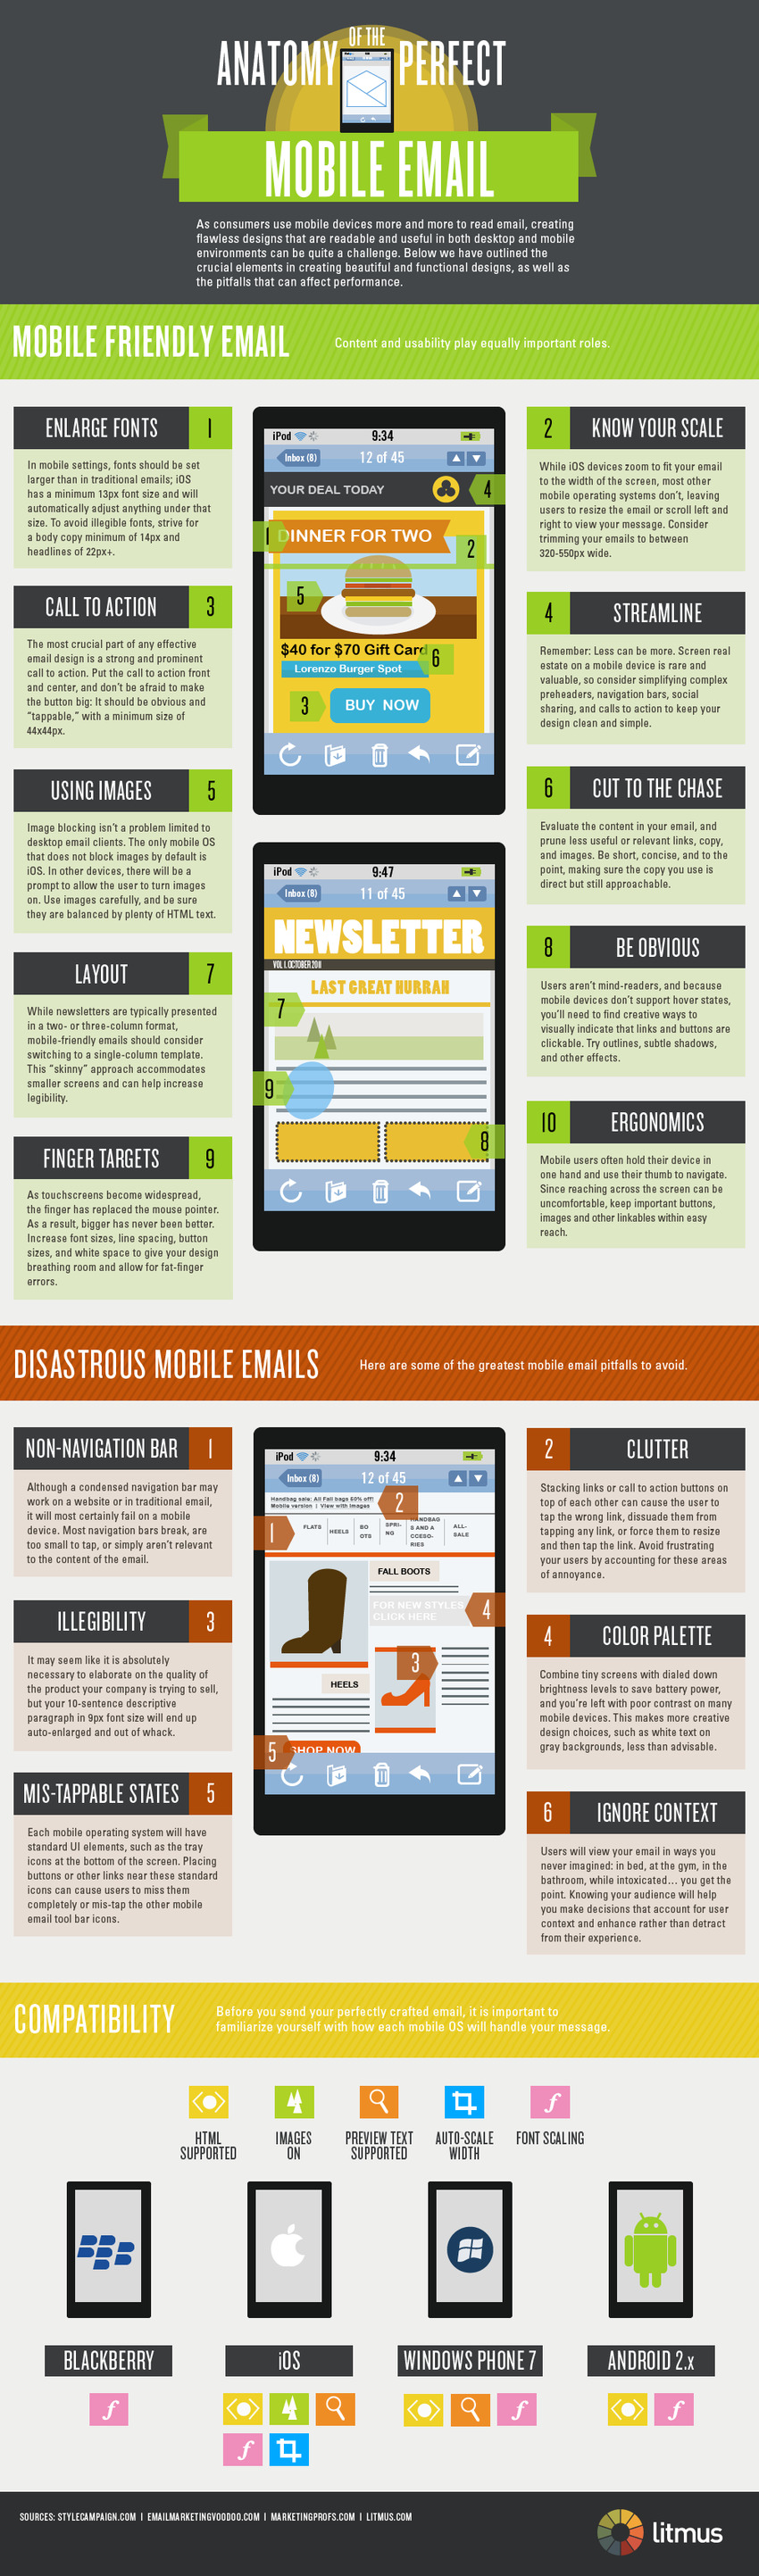 Infographic: Anatomy of the Perfect Mobile Email - KISSmetrics | The MarTech Digest | Scoop.it